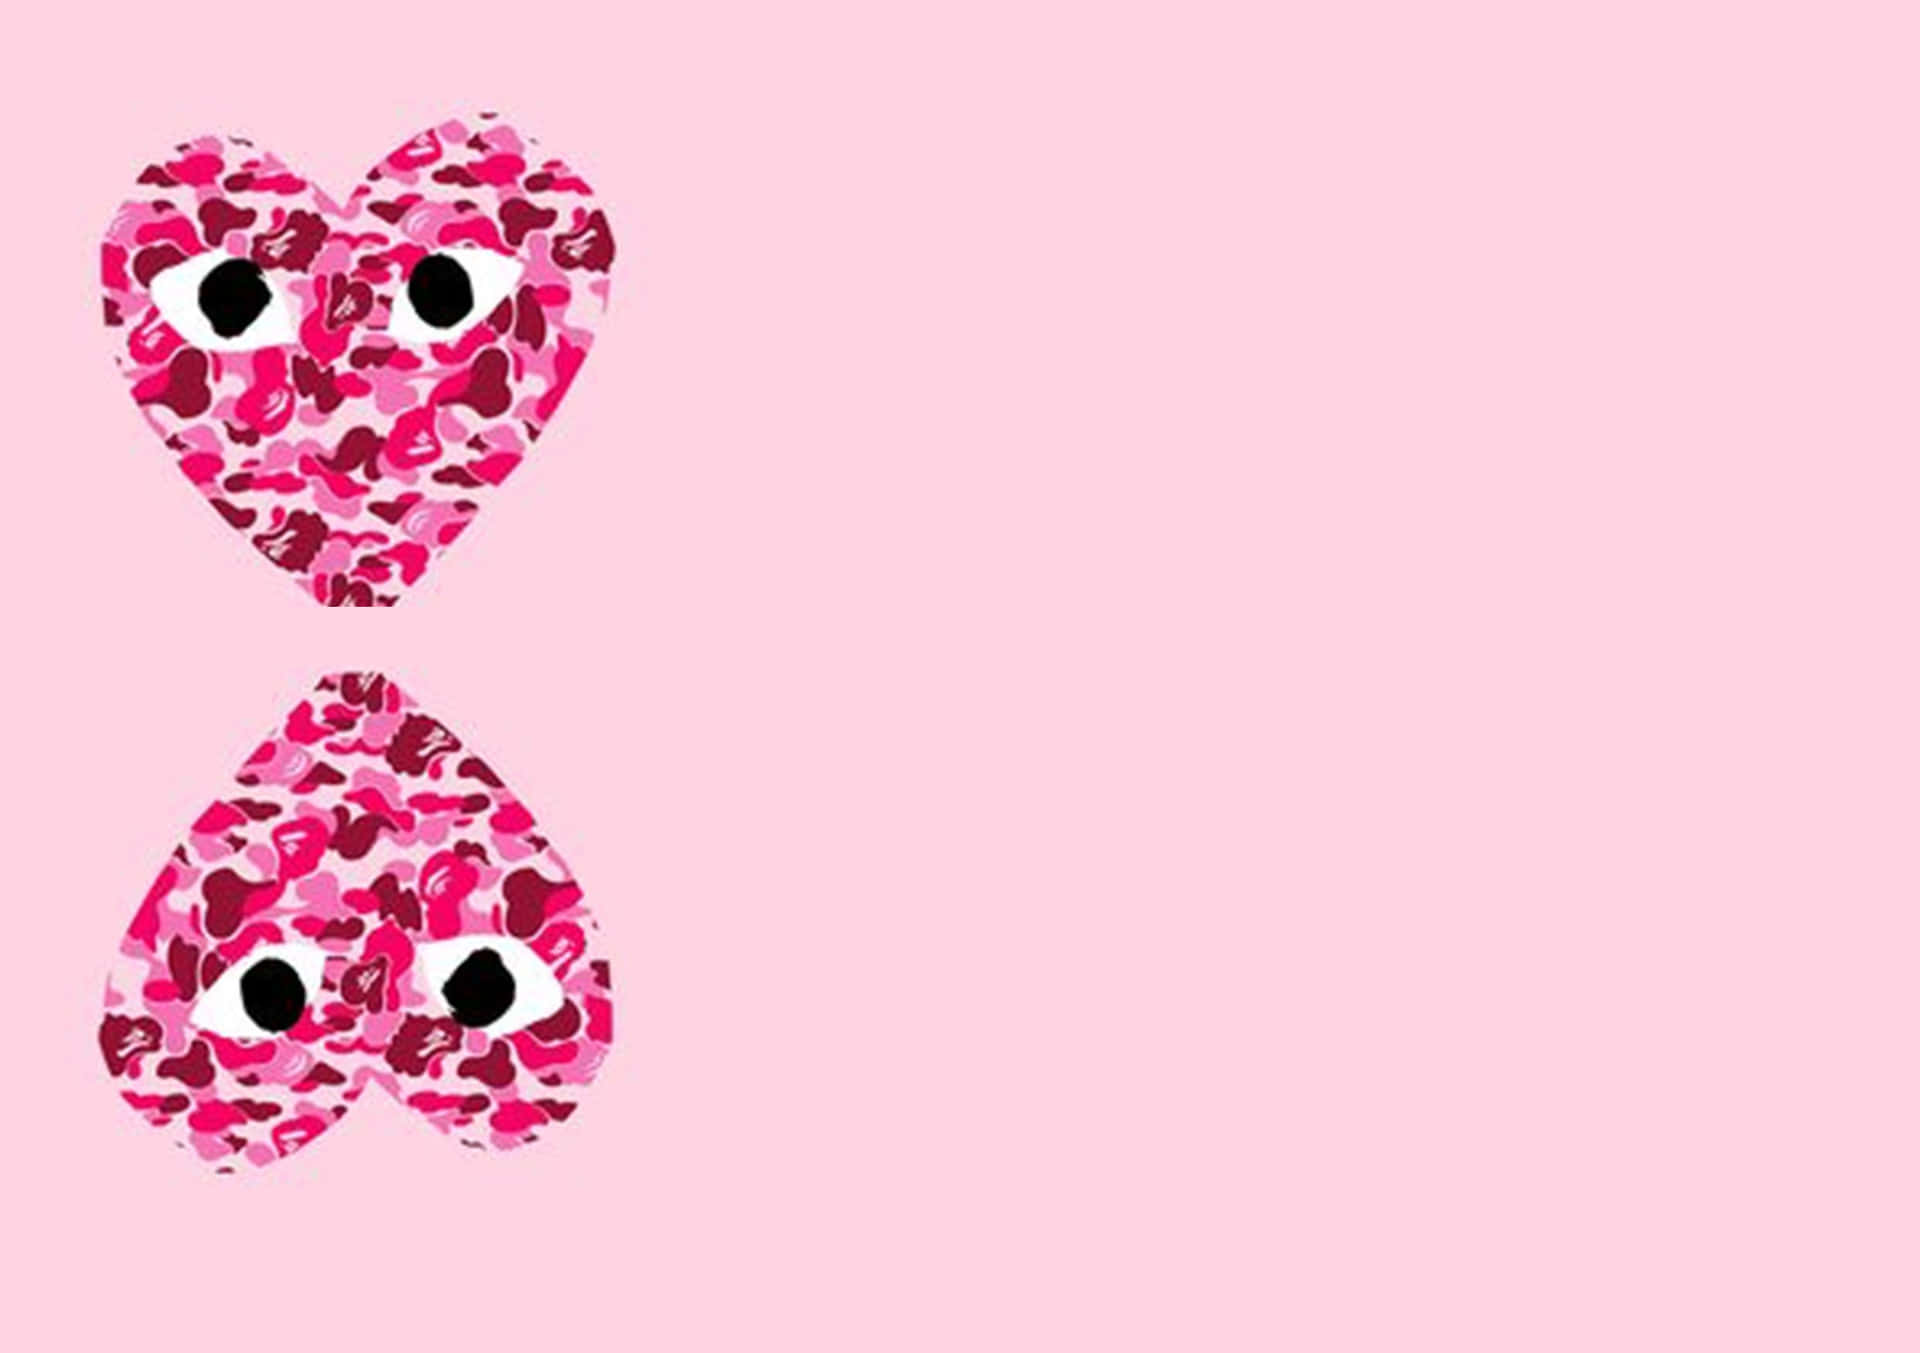 Two Pink Hearts With Eyes On A Pink Background Wallpaper